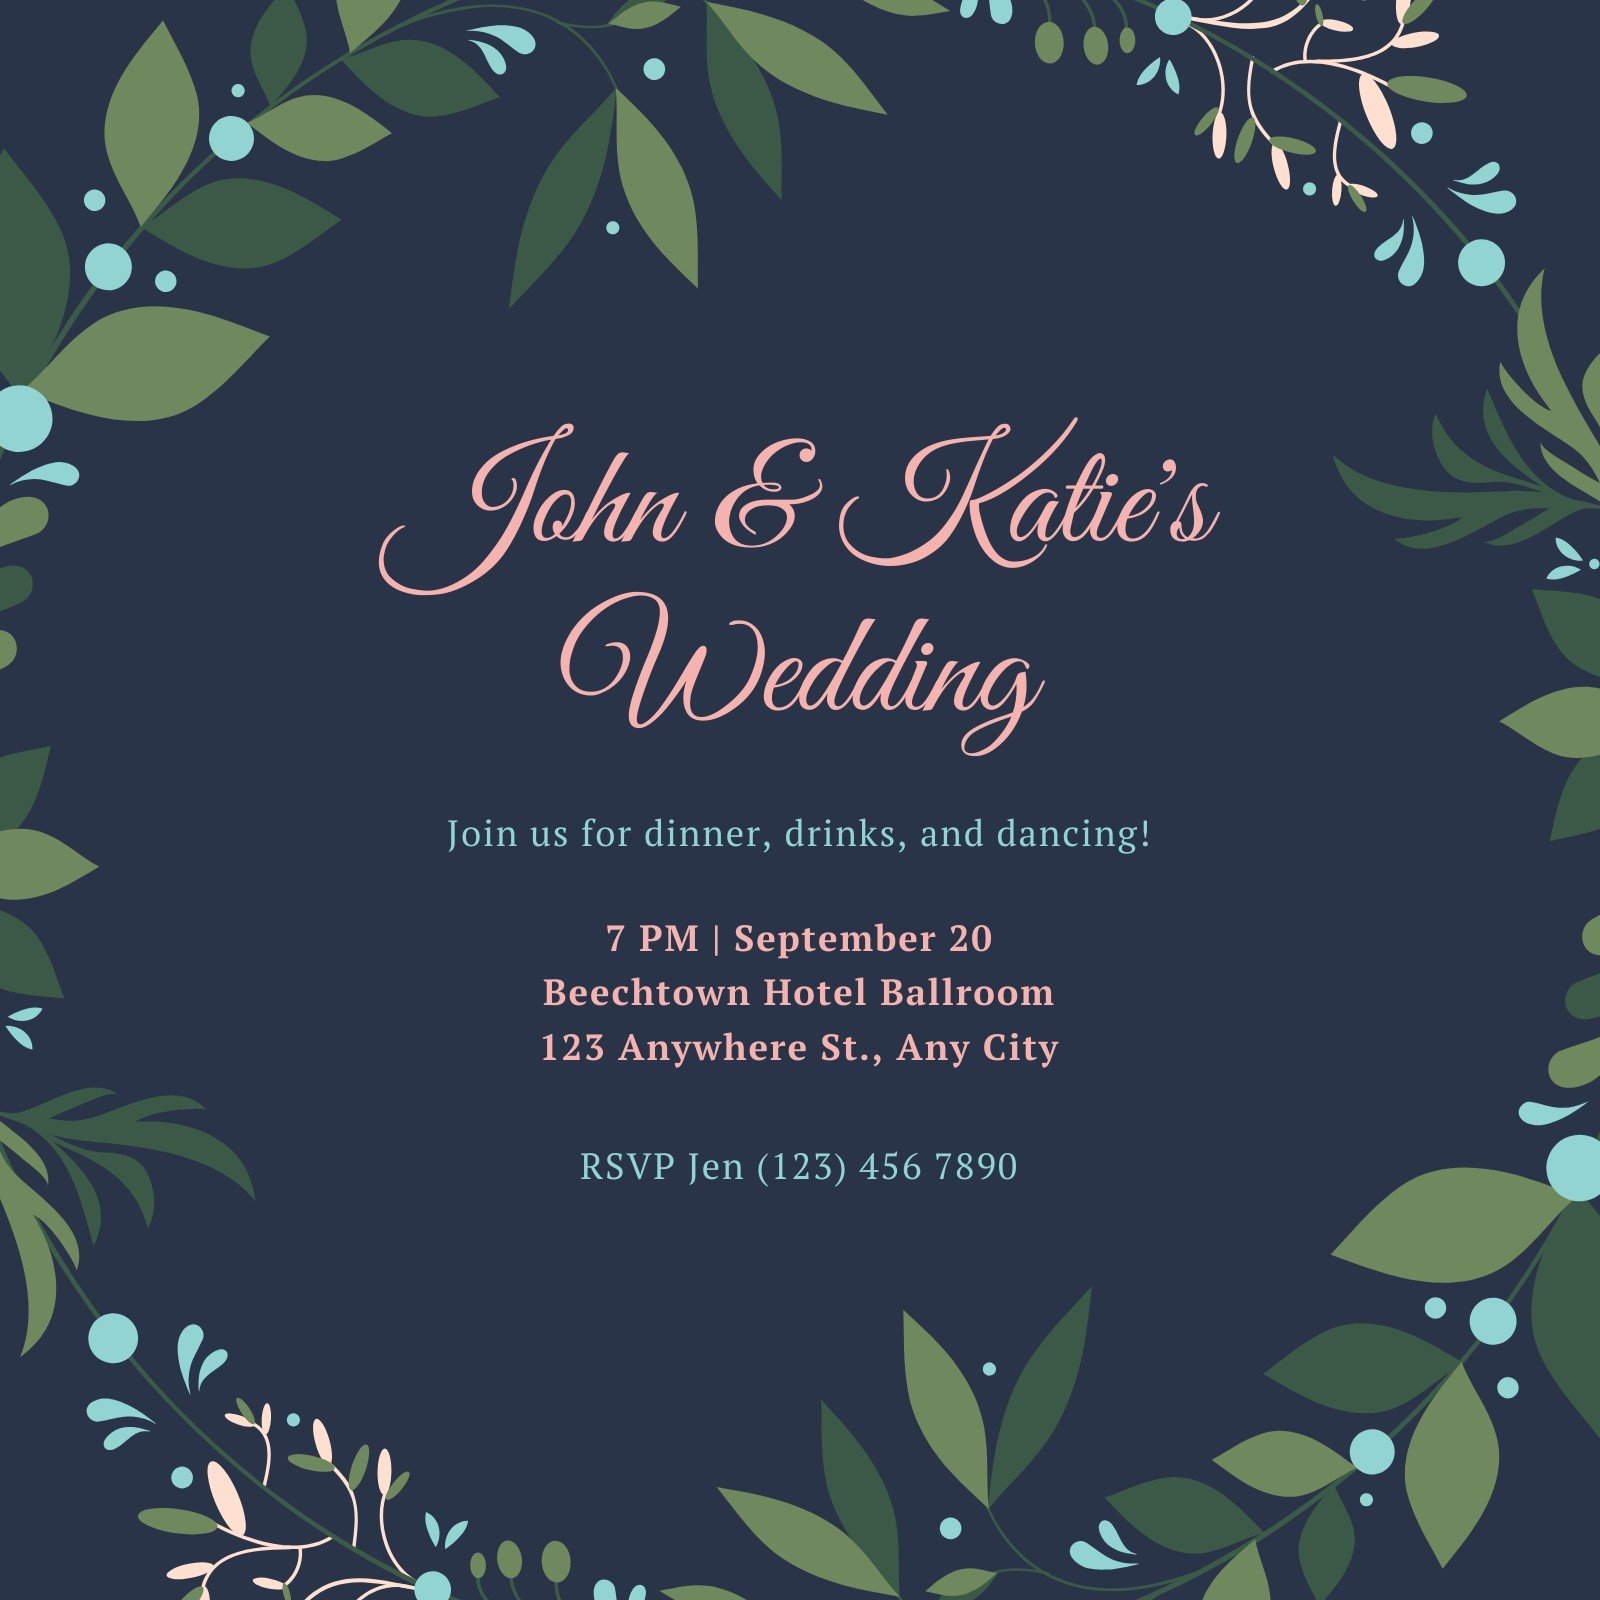 Blue and Pink Wreath Wedding Reception Invitation - Templates by Canva